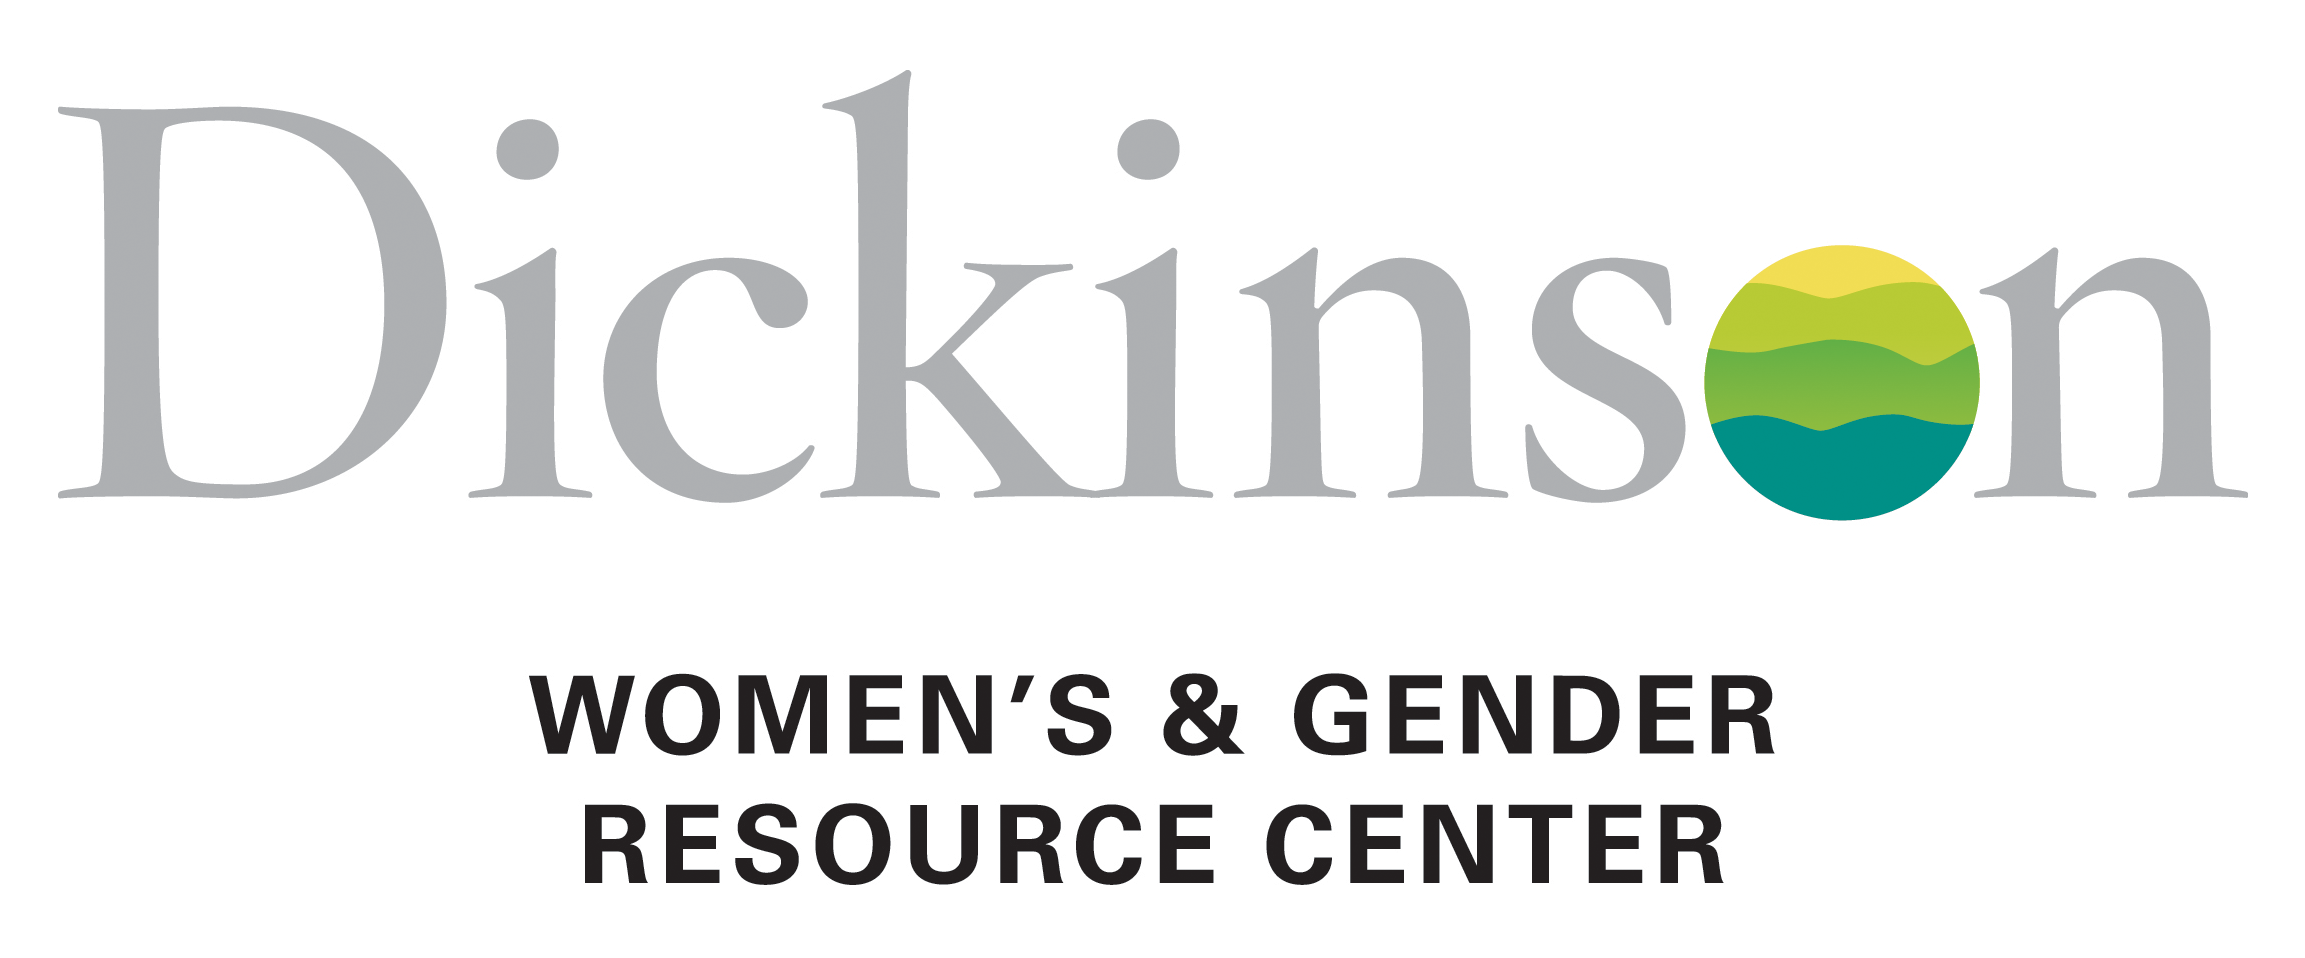 the women's and gender resource center